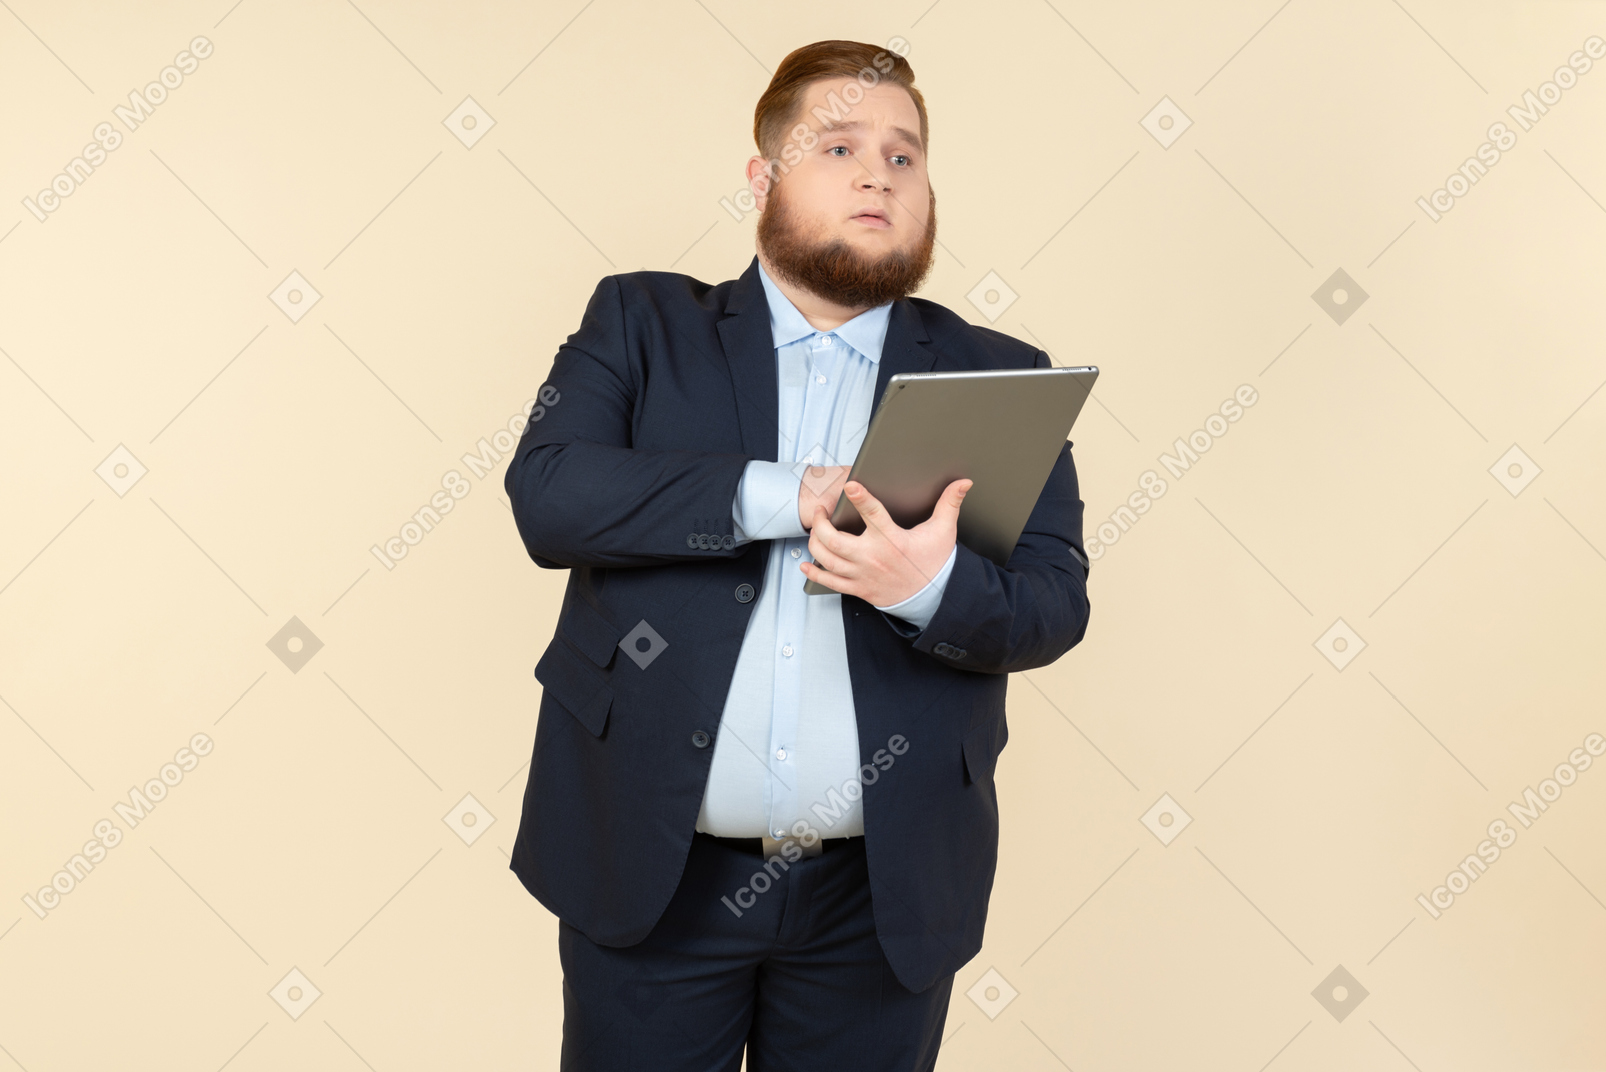 Young overweight office worker holding digital tablet